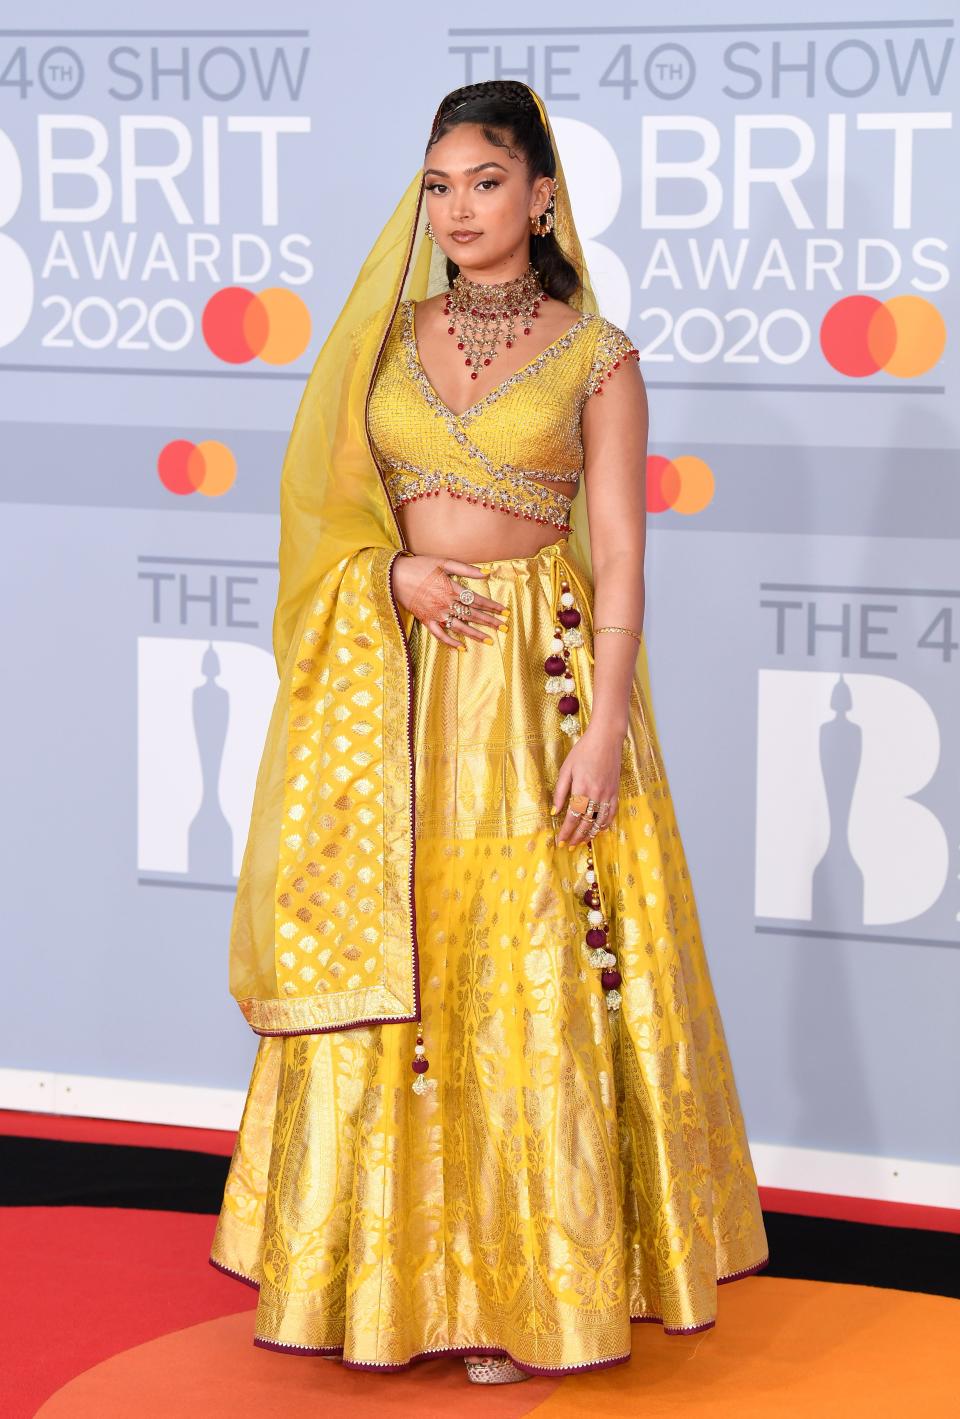 Joy Crookes attends The BRIT Awards 2020 at The O2 Arena, London.